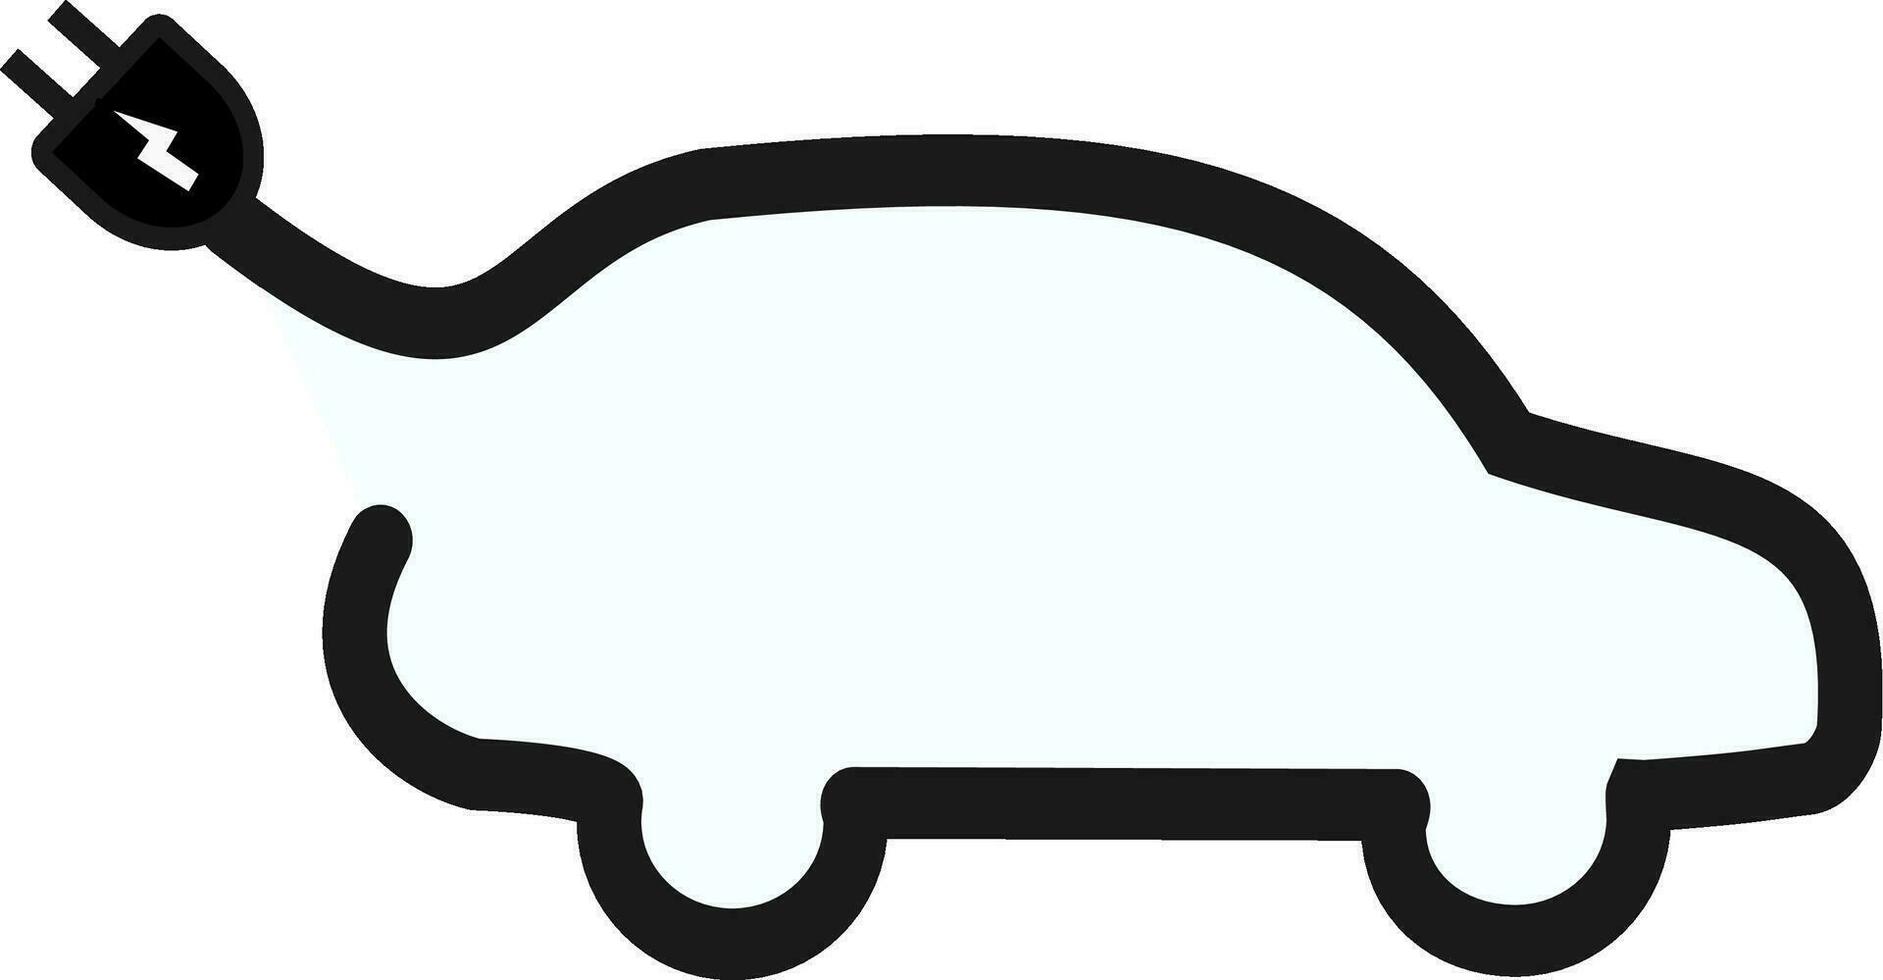 Electric car icon. EV. Electric vehicle. Charging station. Vector icon isolated on white background. Replaceable vector design.